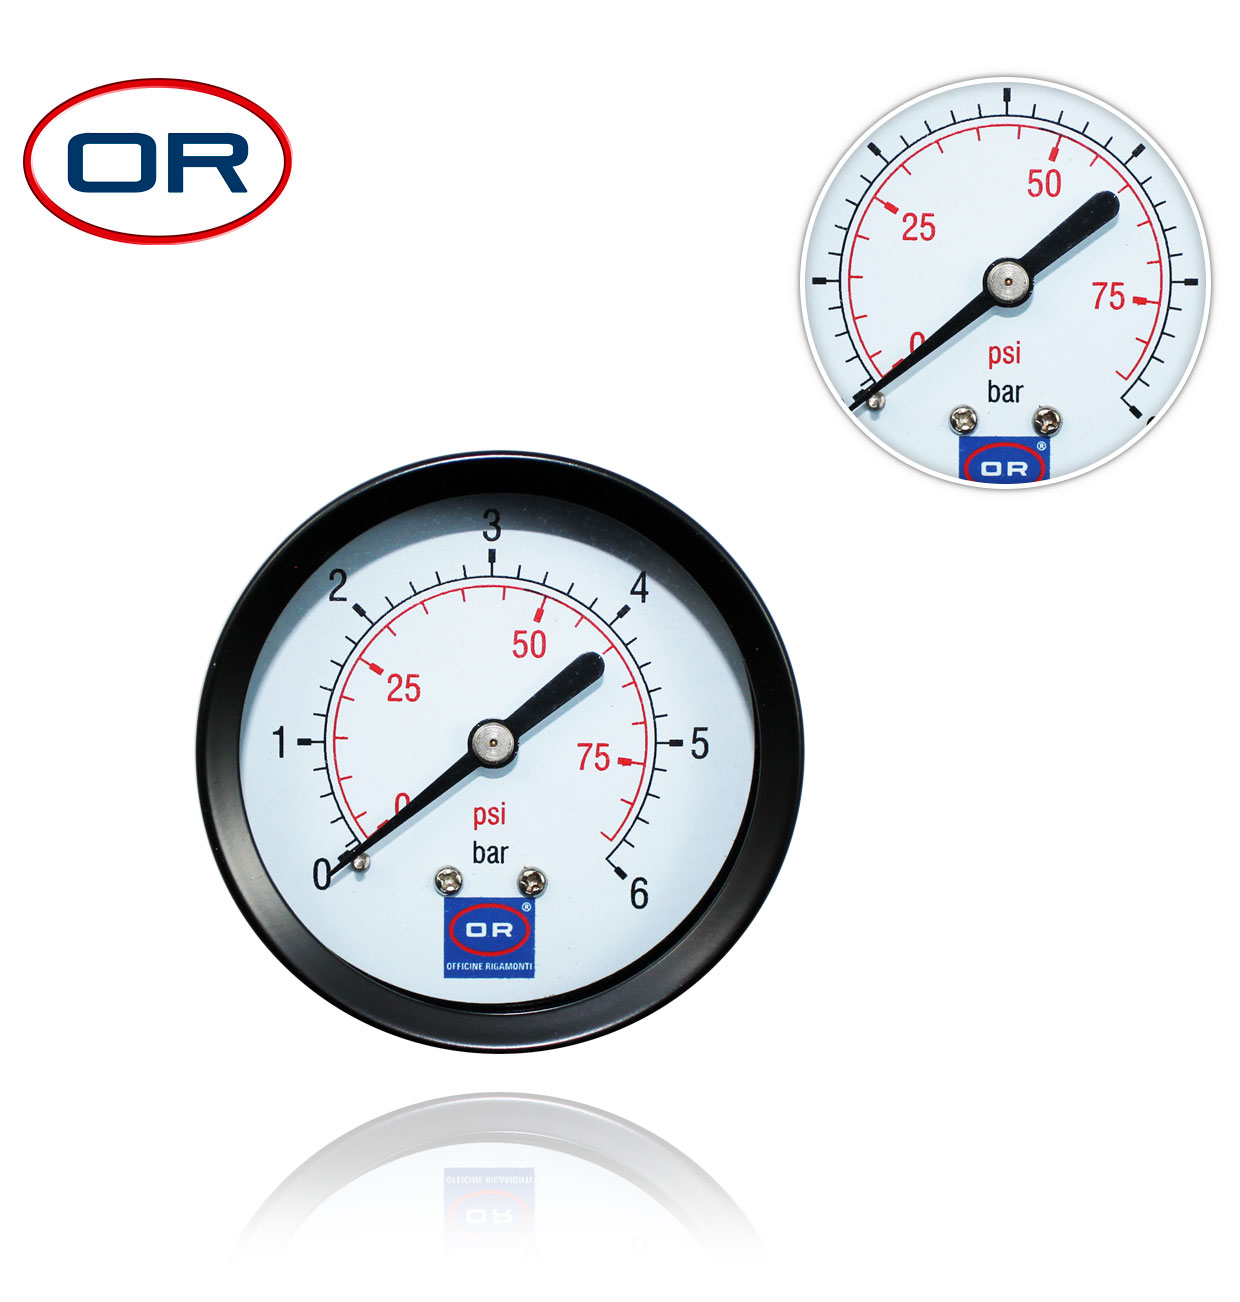 D63 0-6bar R1/4" REAR MANOMETER WITH ABS O-RING